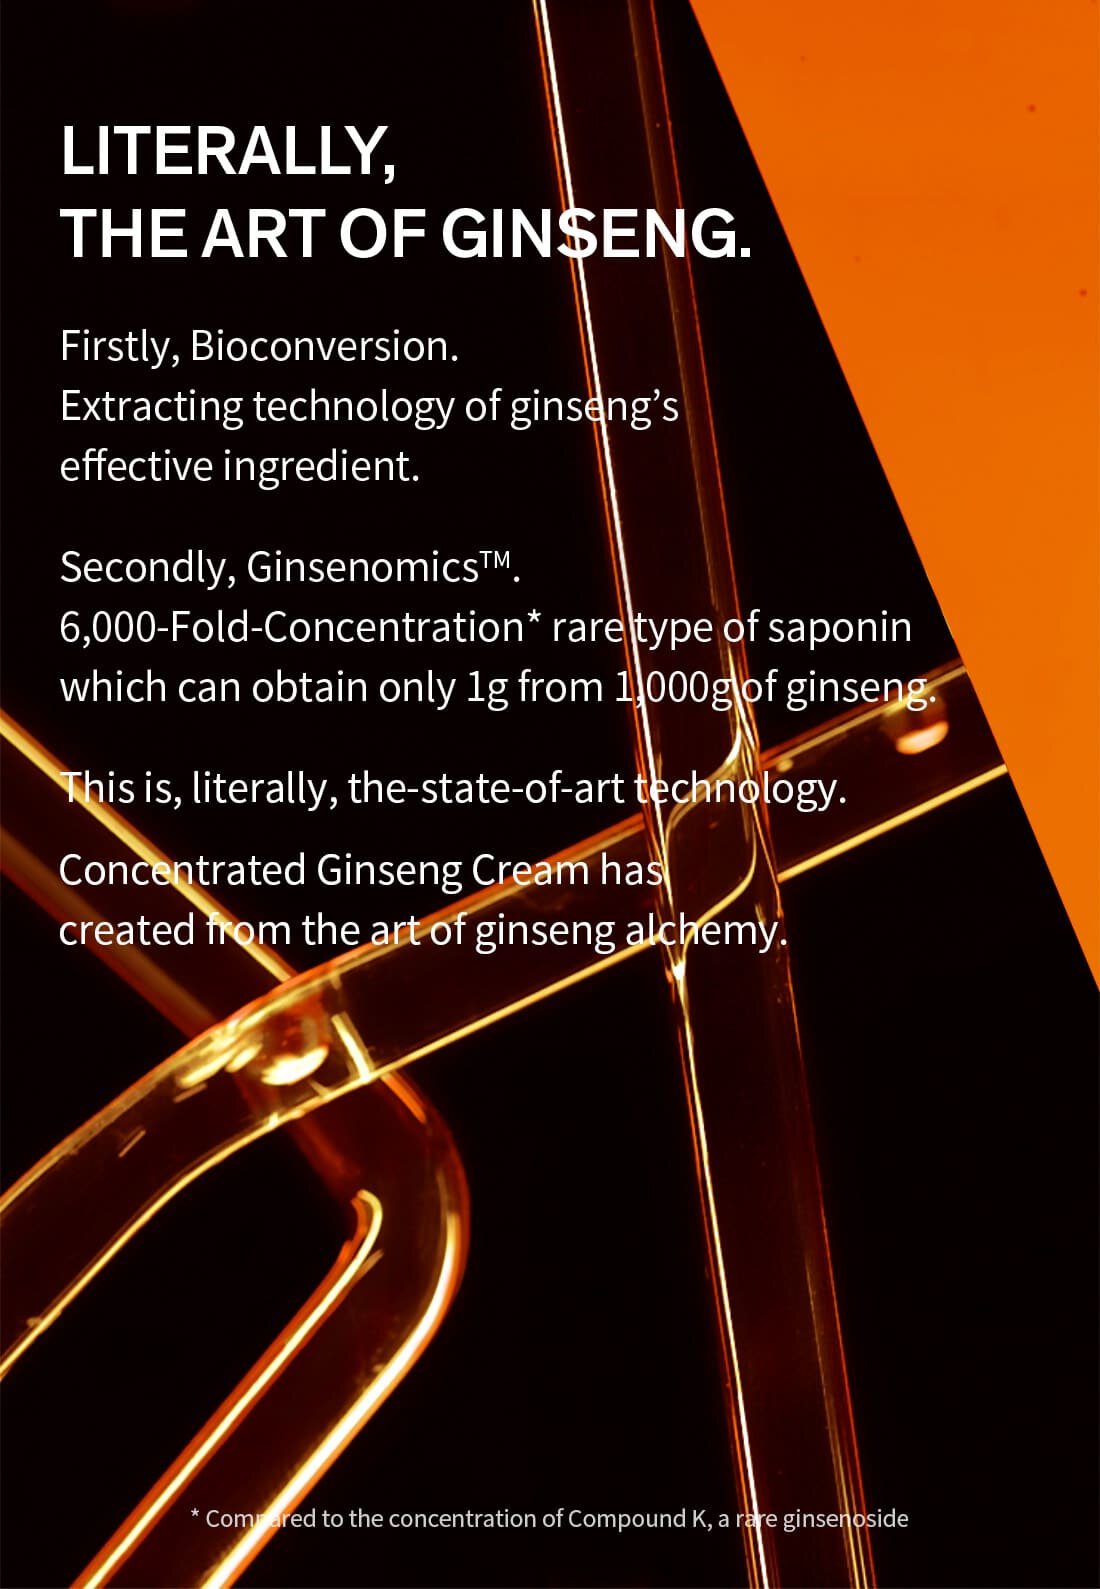 literally, the art of ginseng.Firstly, Bioconversion. Extracting technology of ginseng’s effective ingredient.Secondly, GinsenomicsTM. 6,000-Fold-Concentration* rare type of saponin which can obtain only 1g from 1,000g of ginseng.This is, literally, the-state-of-art technology.Concentrated Ginseng Cream has created from the art of ginseng alchemy.* Compared to the concentration of Compound K, a rare ginsenoside